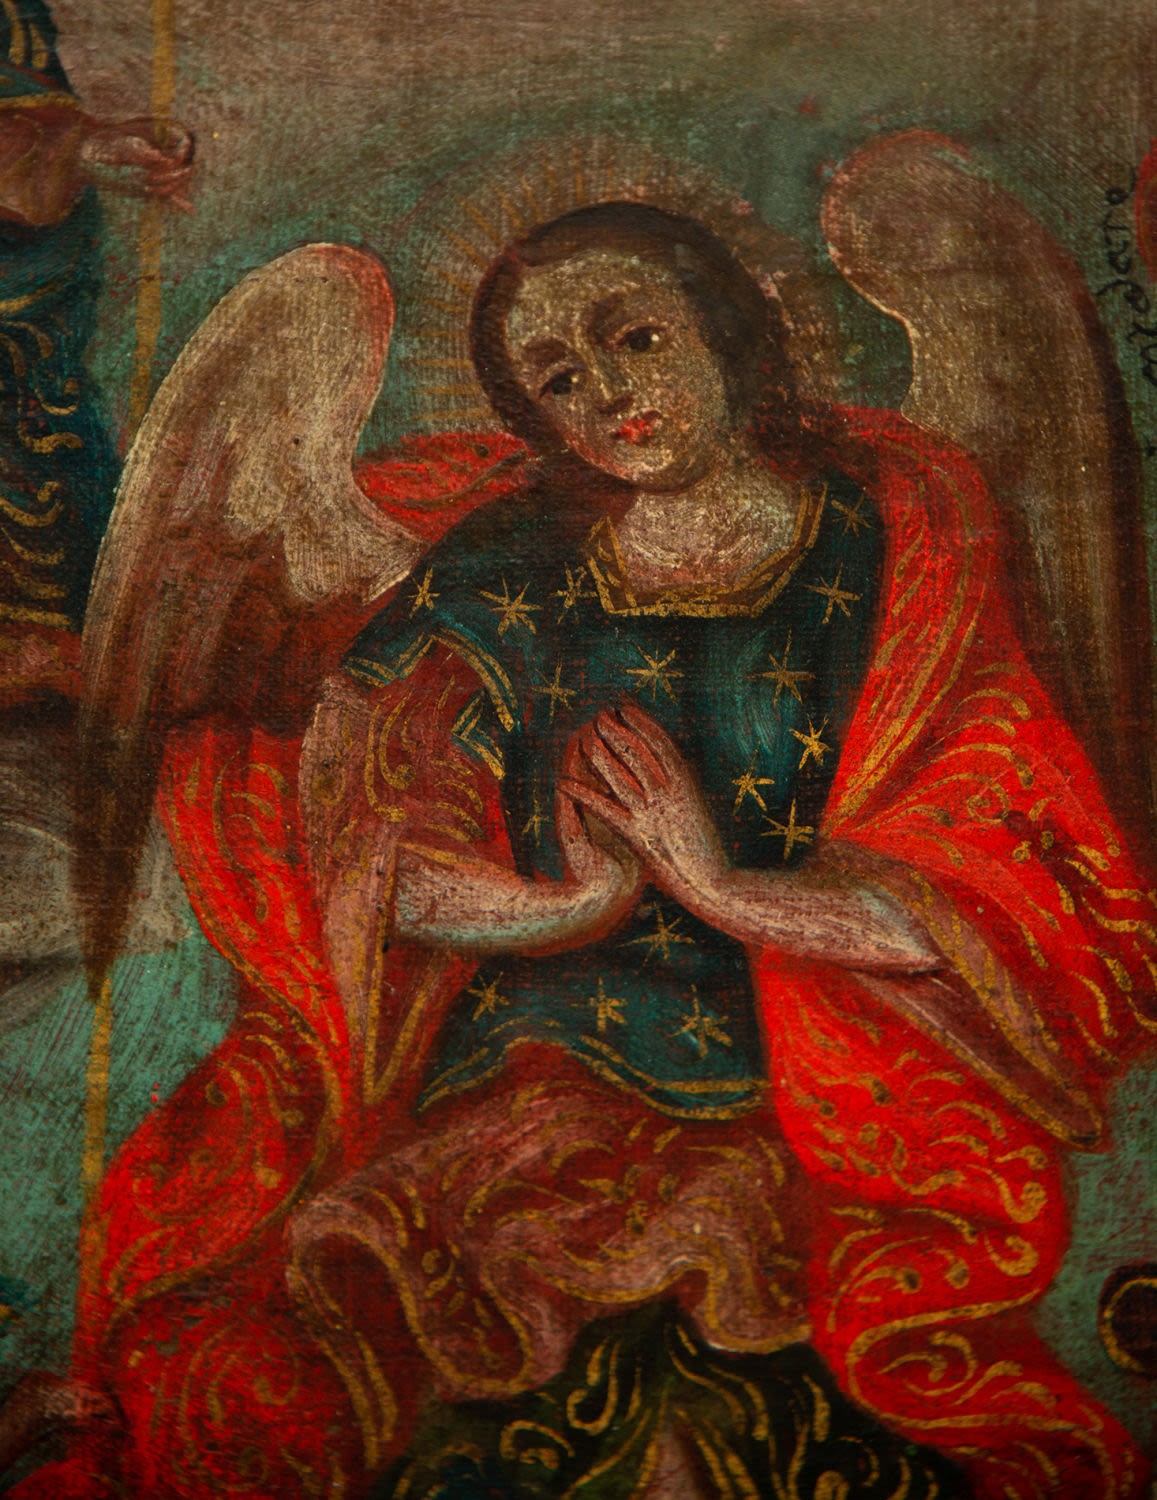 The Ascension of the Virgin Mary, Cuzco colonial school of the 17th century - Image 5 of 11